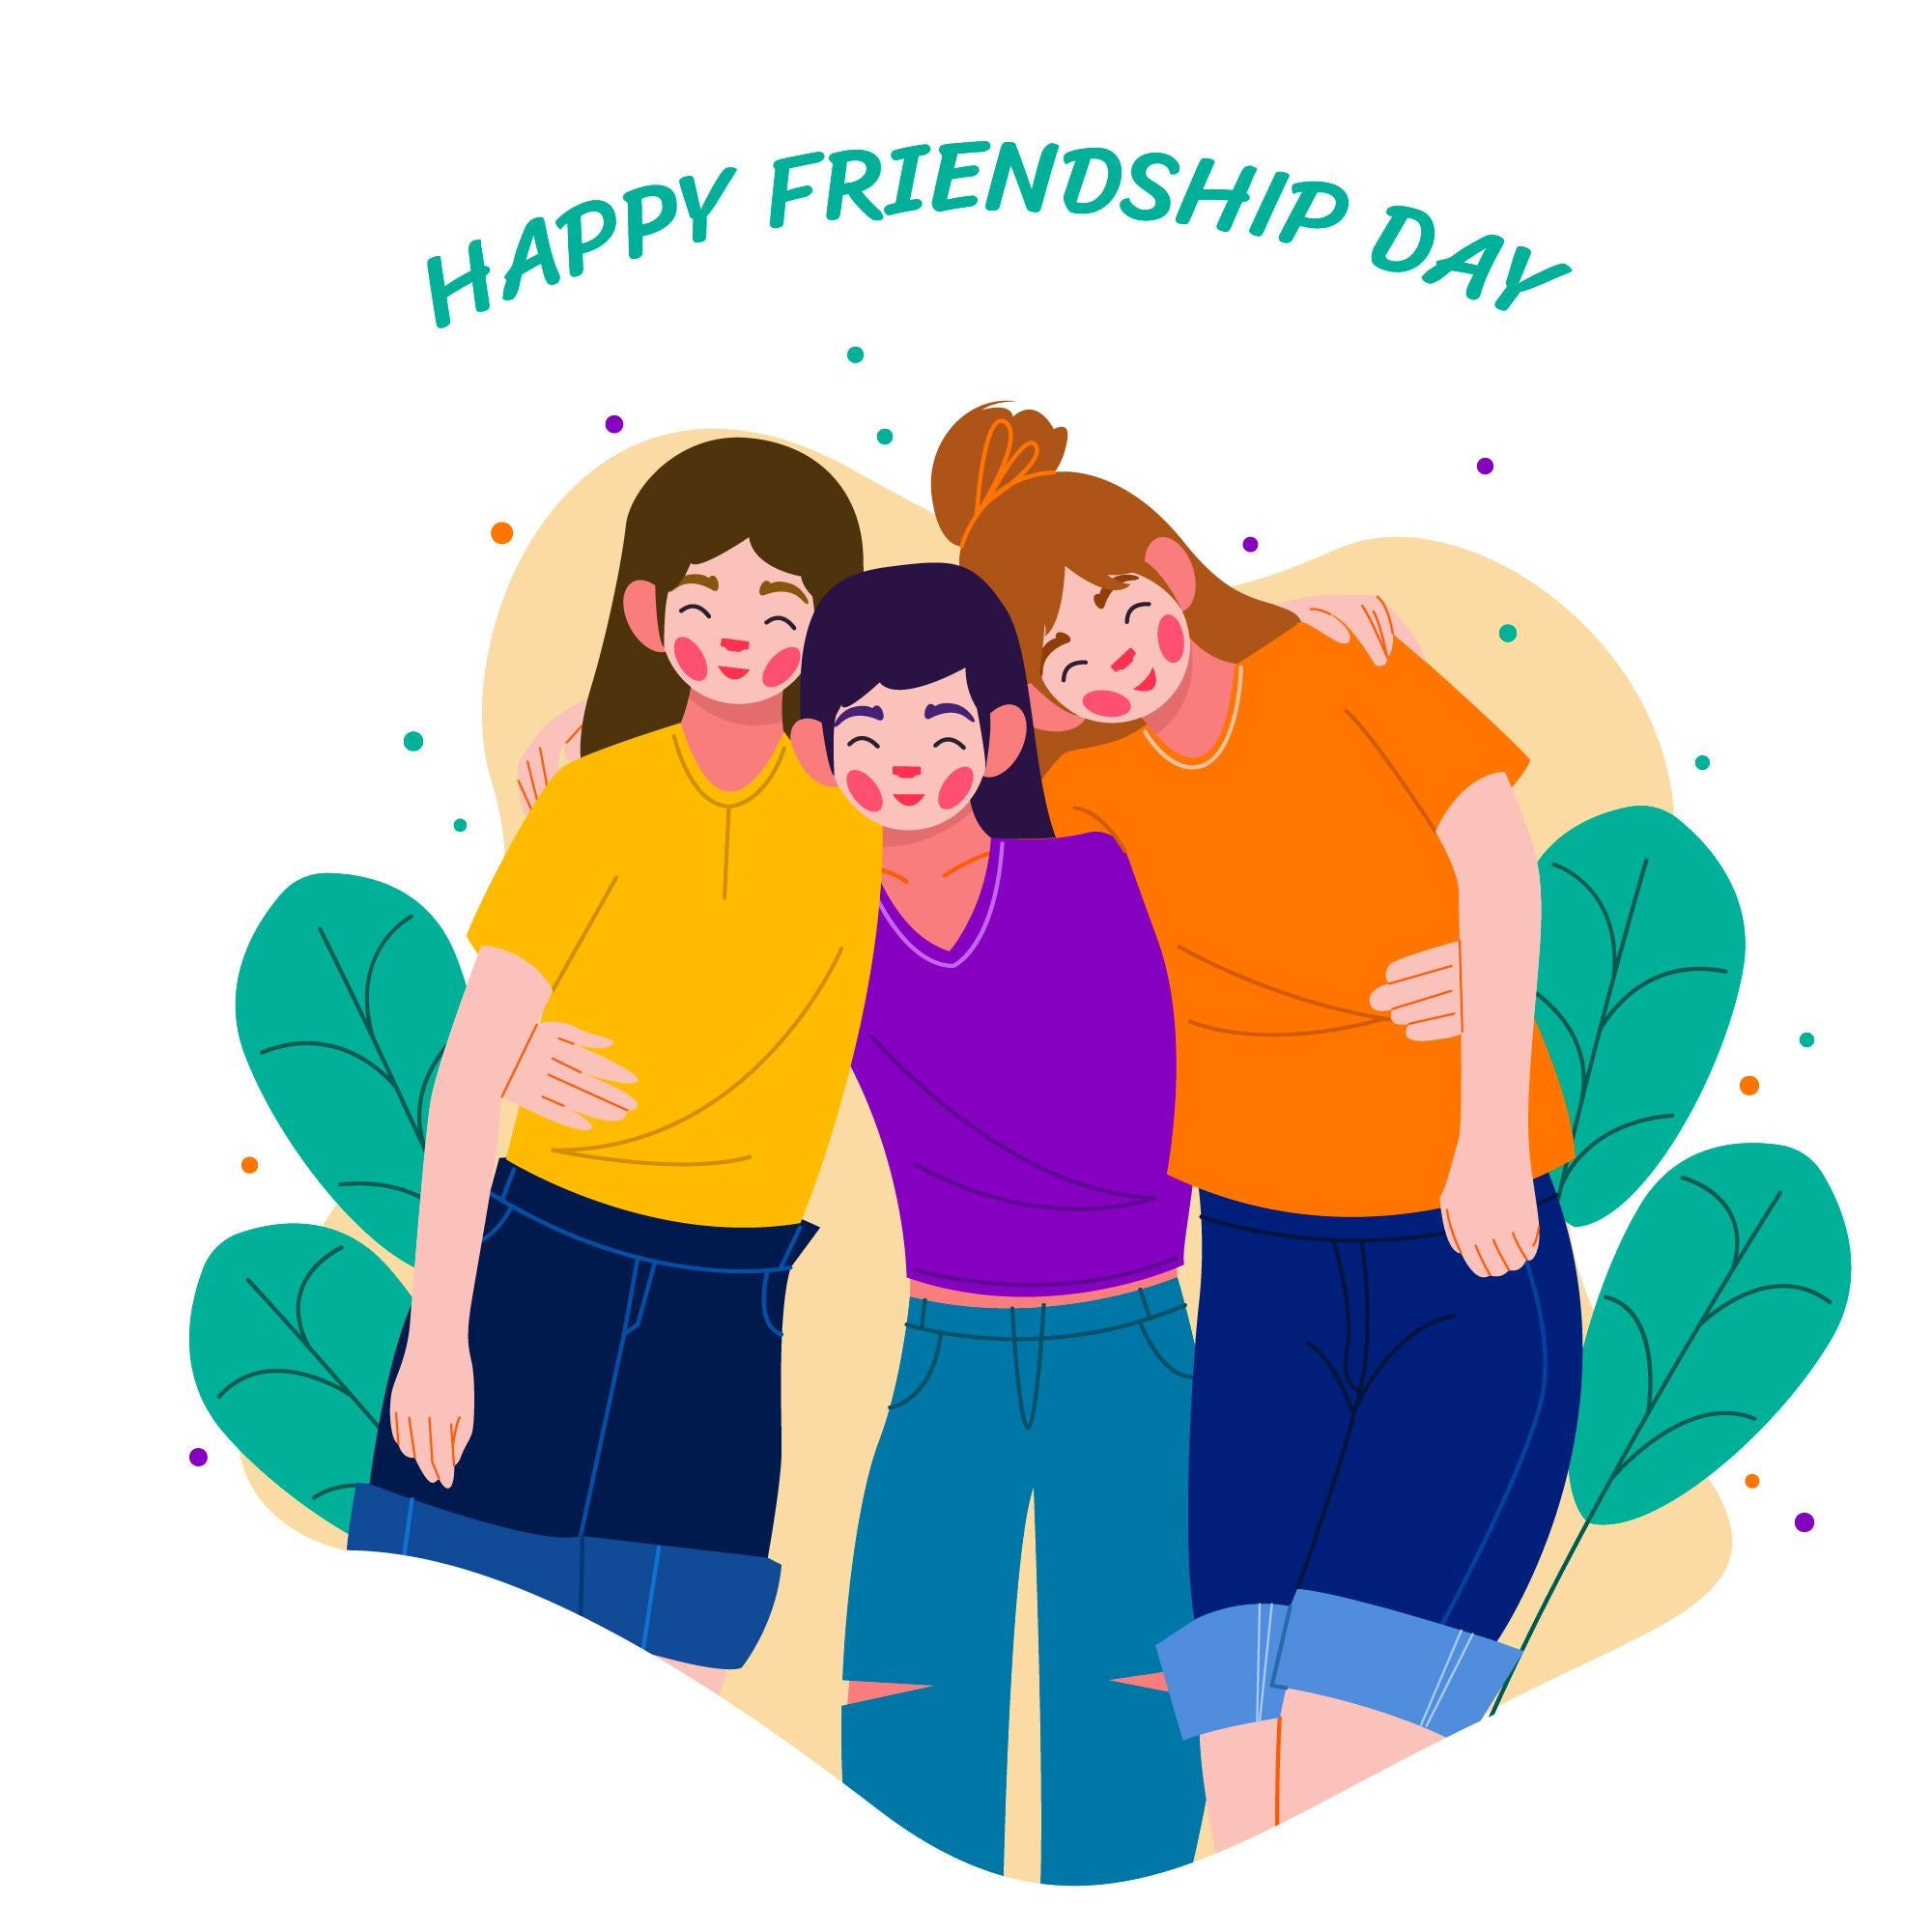 Friendship Day Quotes & Wishes: 51 Friendship One Liners, Instagram Captions & Memes Your Friend Will Love